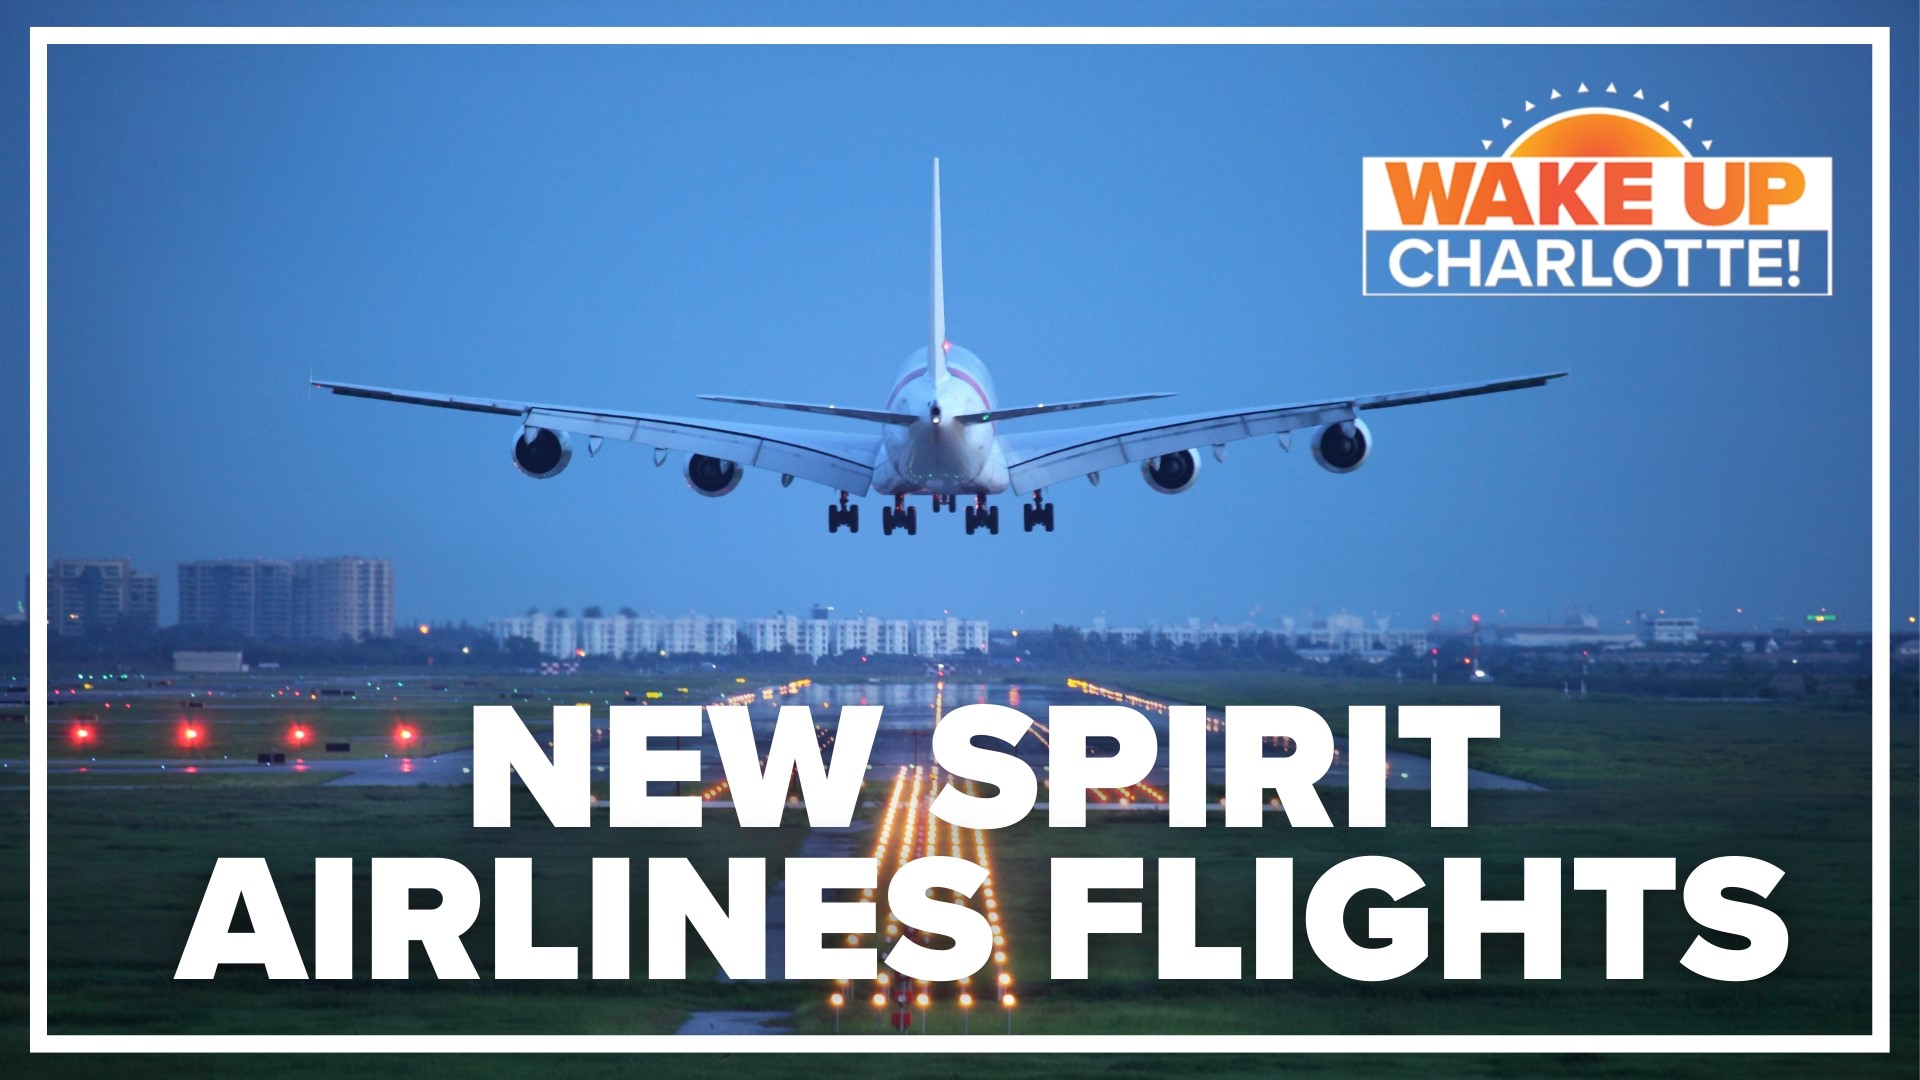 A roundtrip ticket to New York out of Charlotte could cost you only $90 on Spirit, but it doesn't include things like bags and reserved seats.